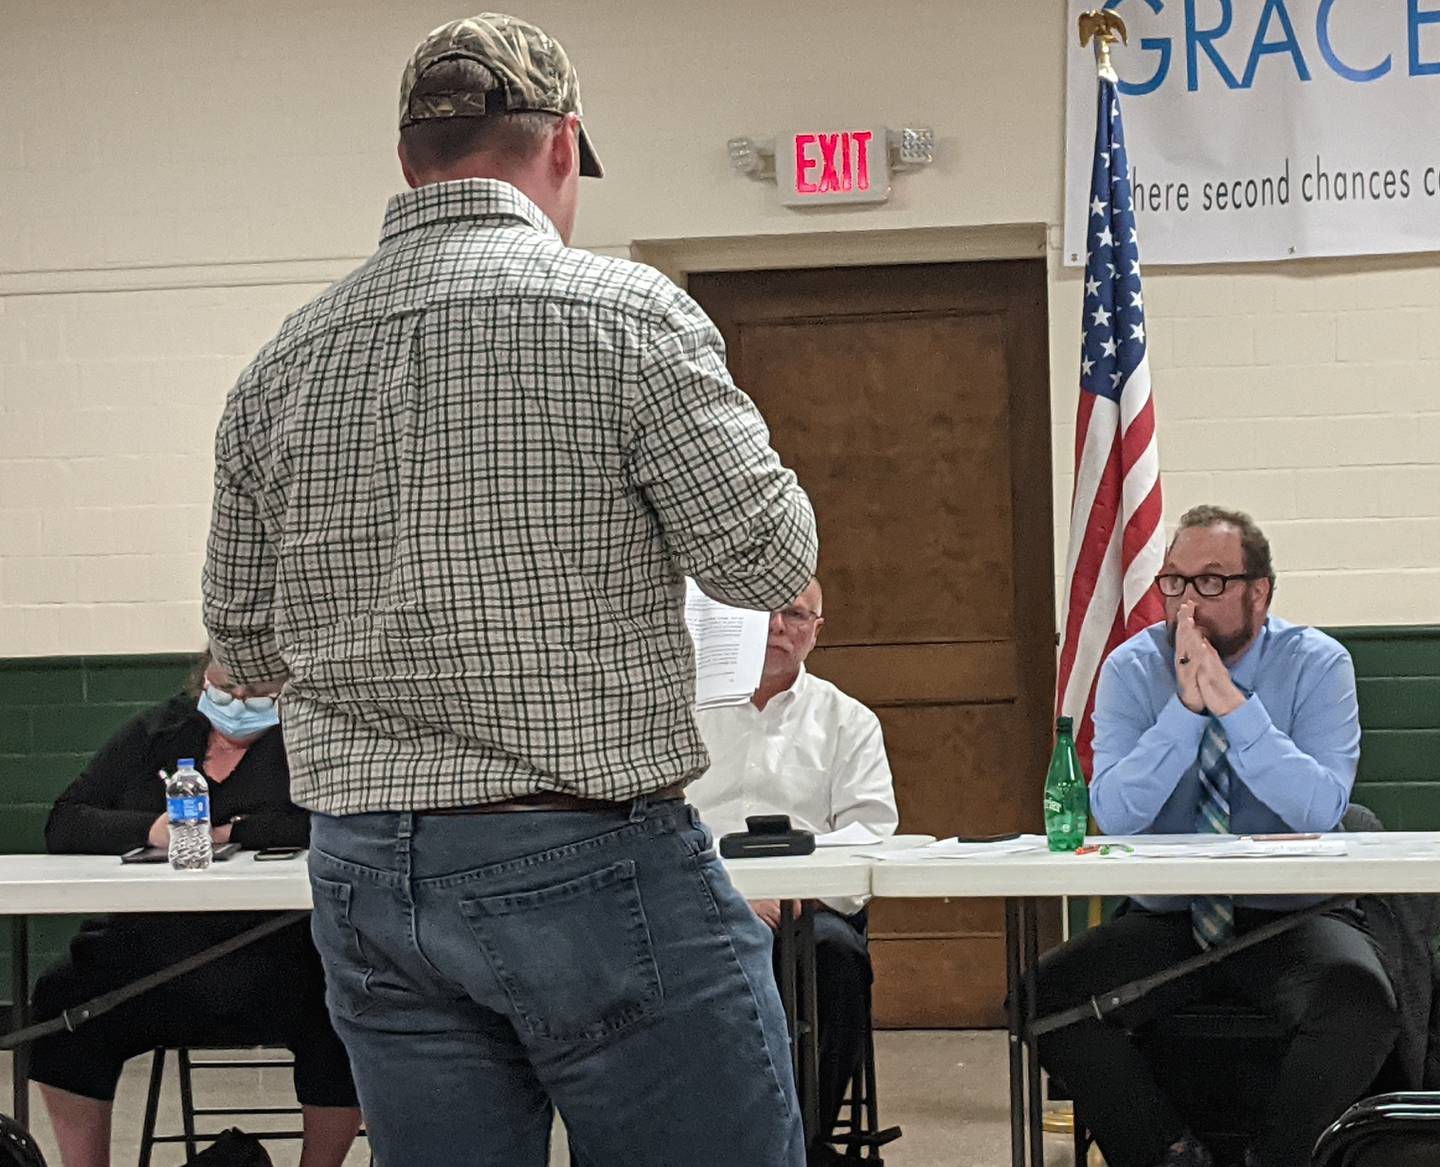 There were 11 community members who spoke during the Dixon Library Board meeting Monday, Aug. 8, 2022, following concerns about censorship and discrimination with LGBTQ comic books containing sexual content.